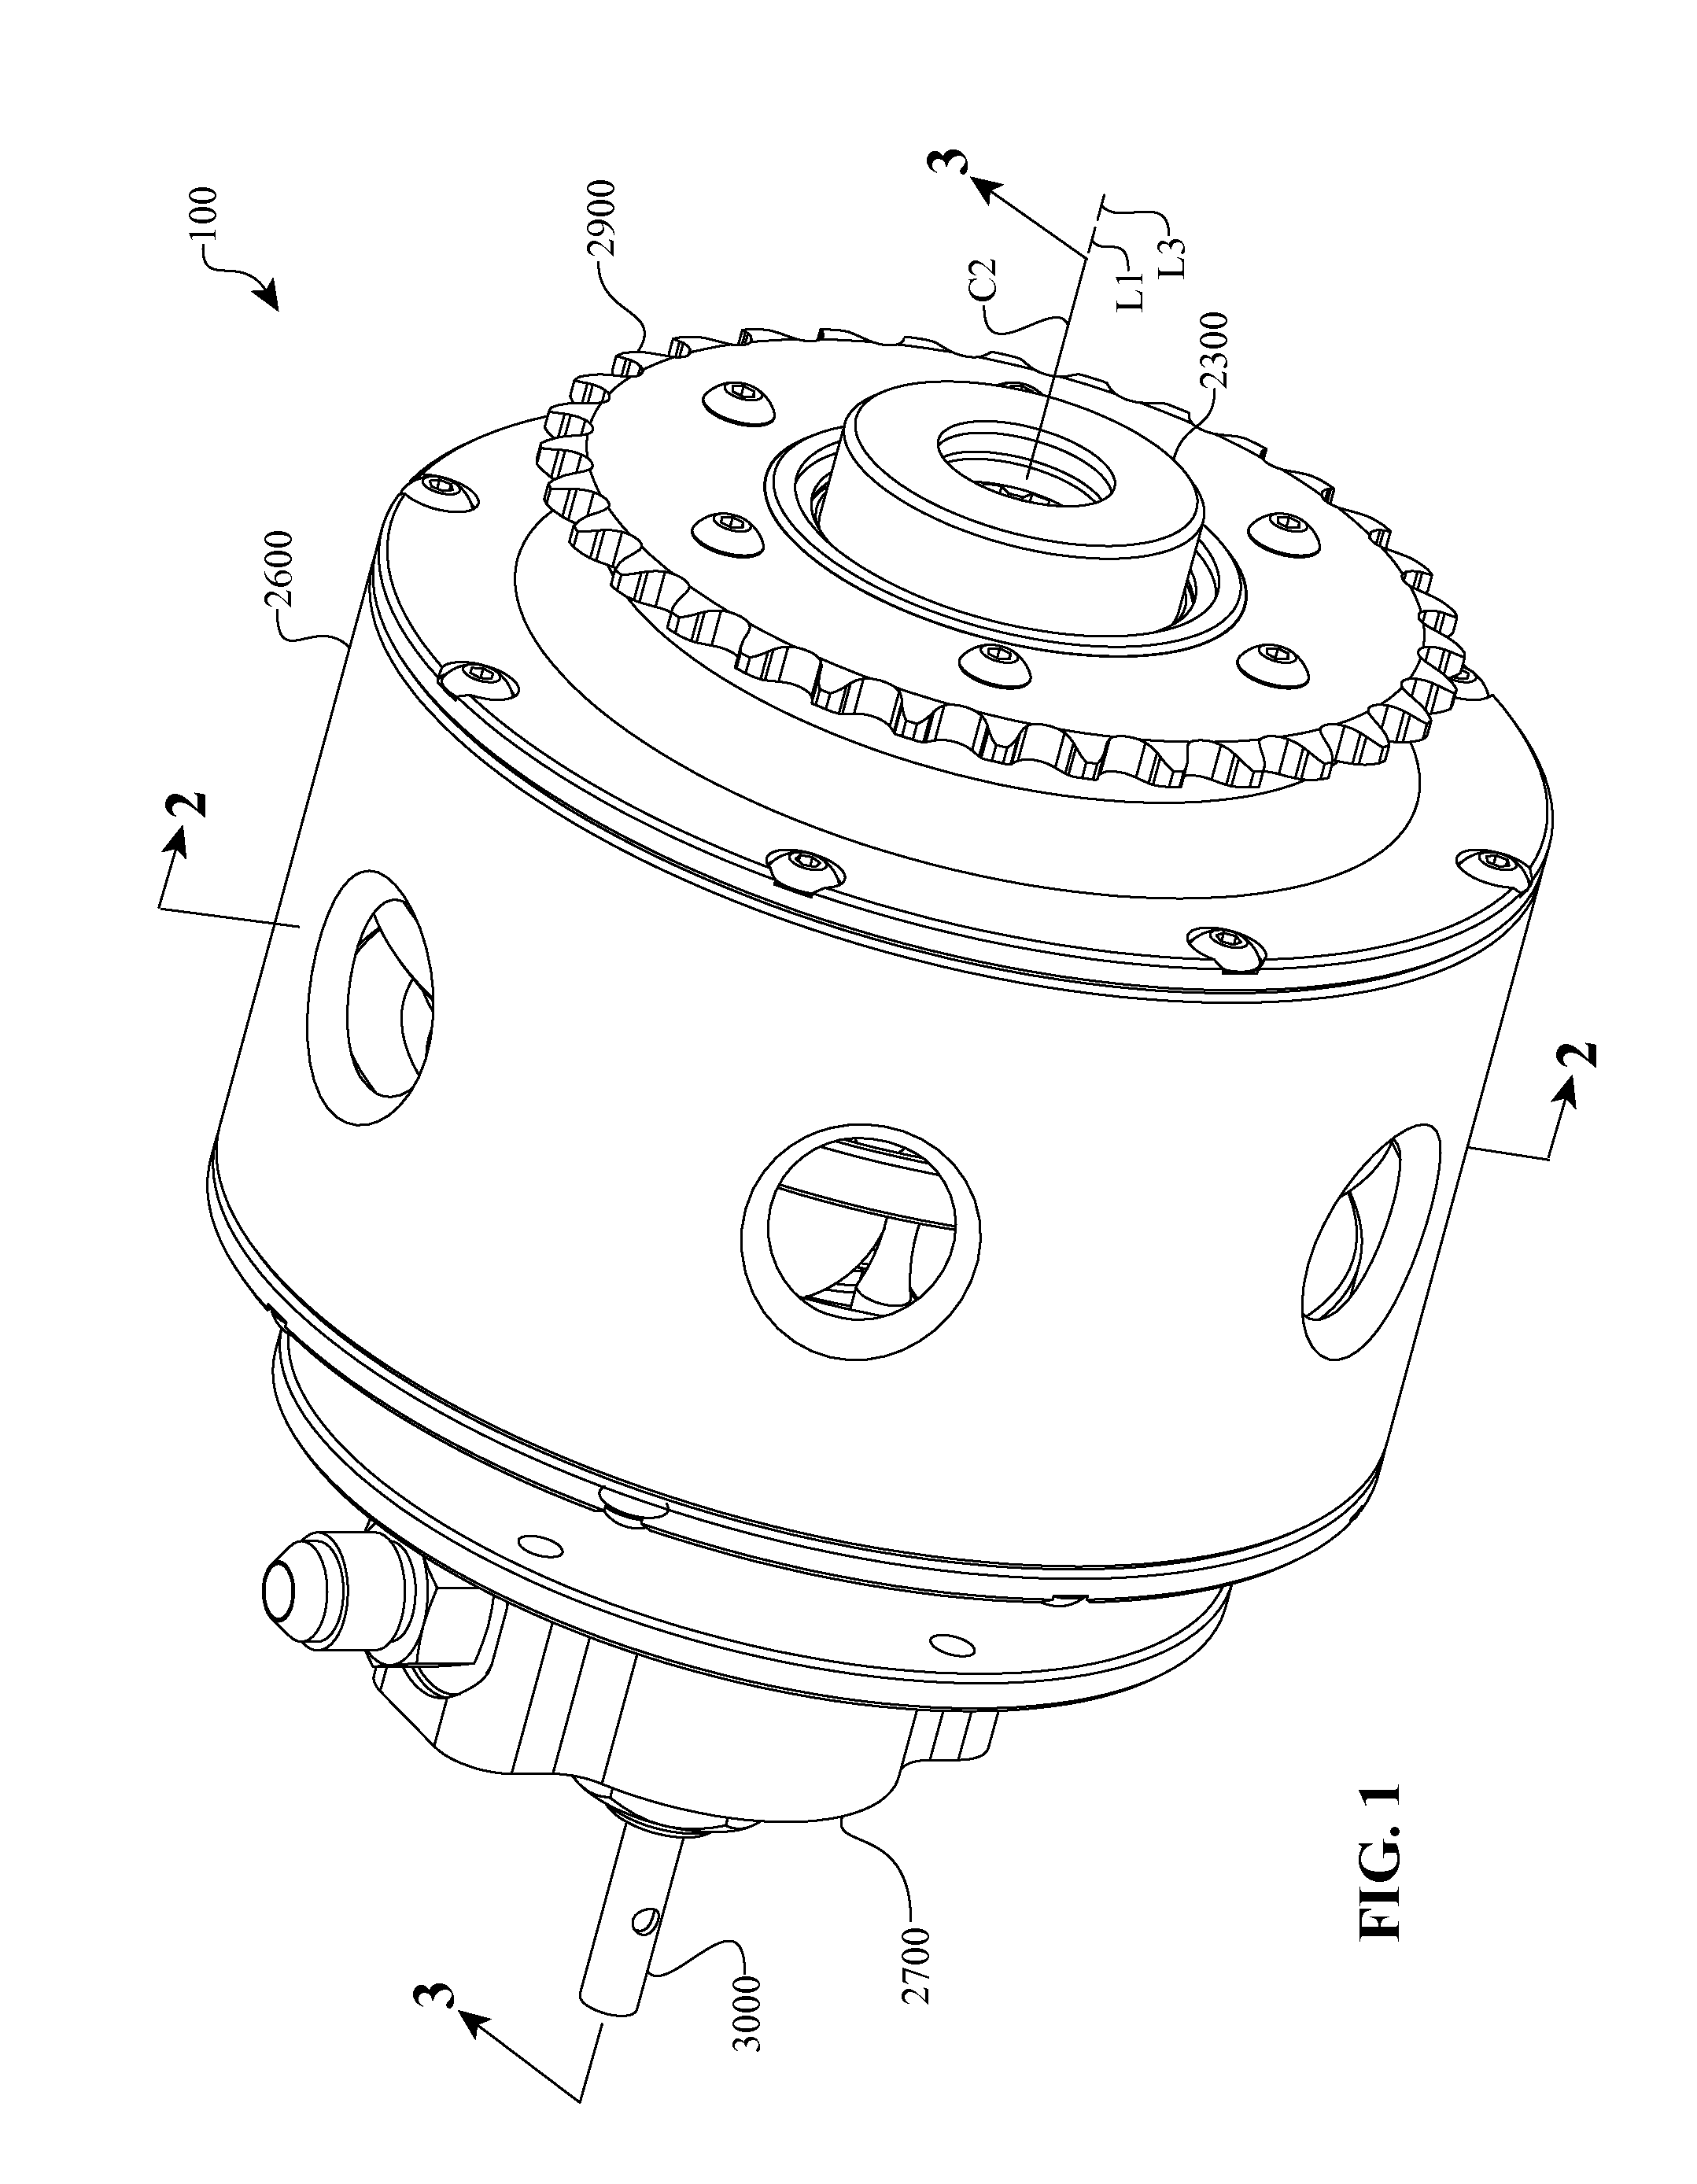 Continuously and/or infinitely variable transmissions and methods therefor